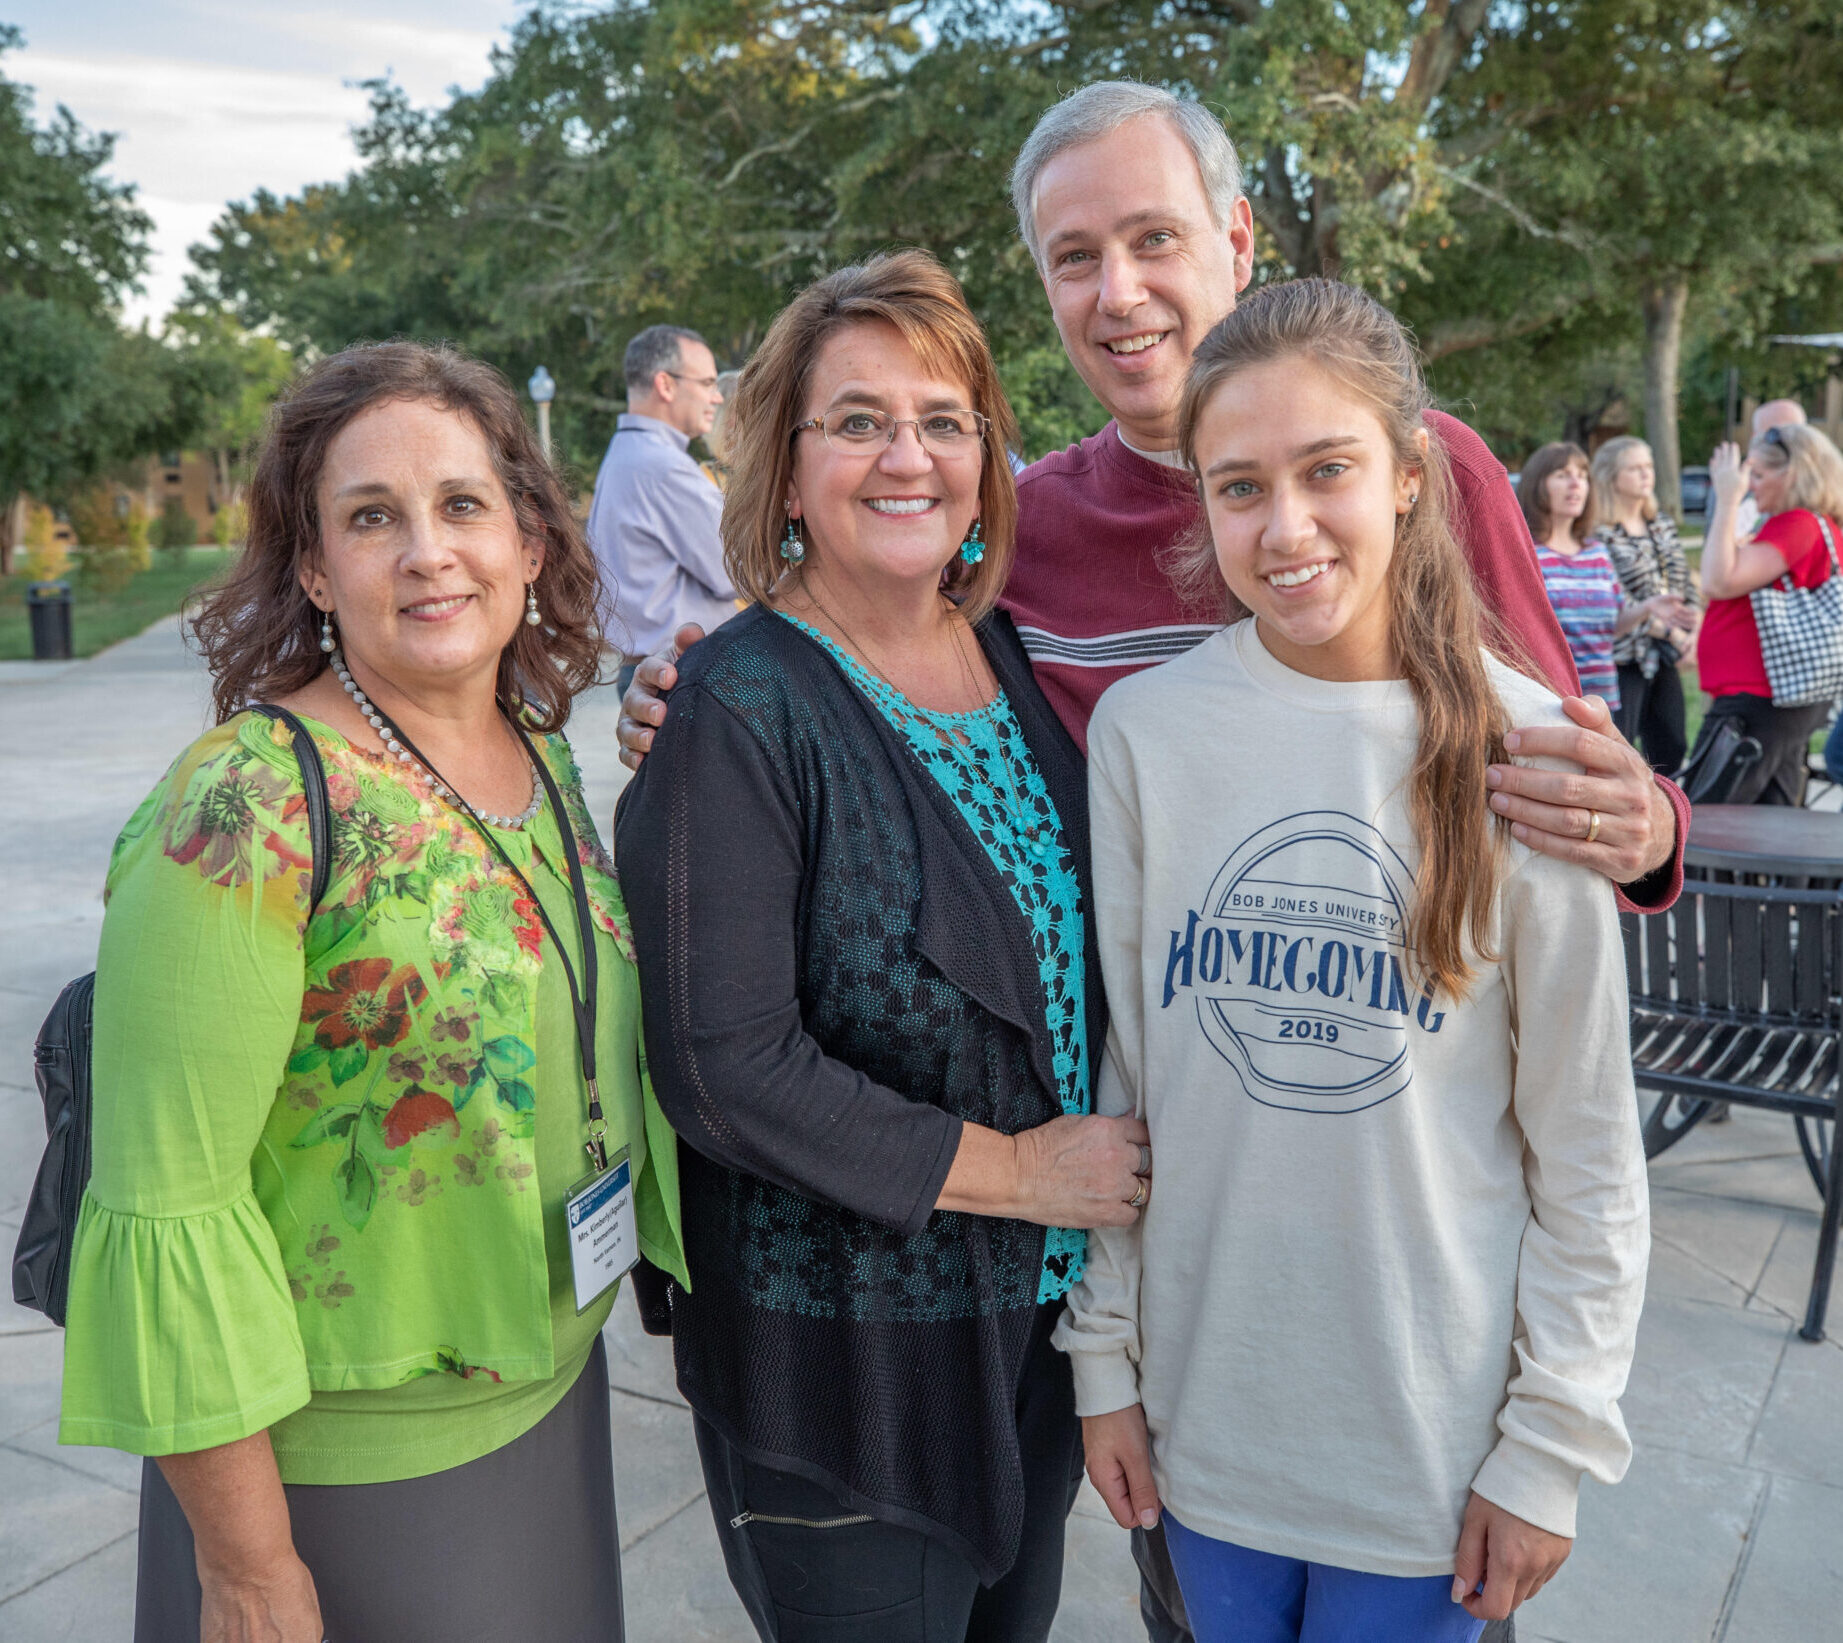 Alumni gather for Class Festival (15-35yrs) during BJU Homecoming, October 11, 2019. (Hal Cook)